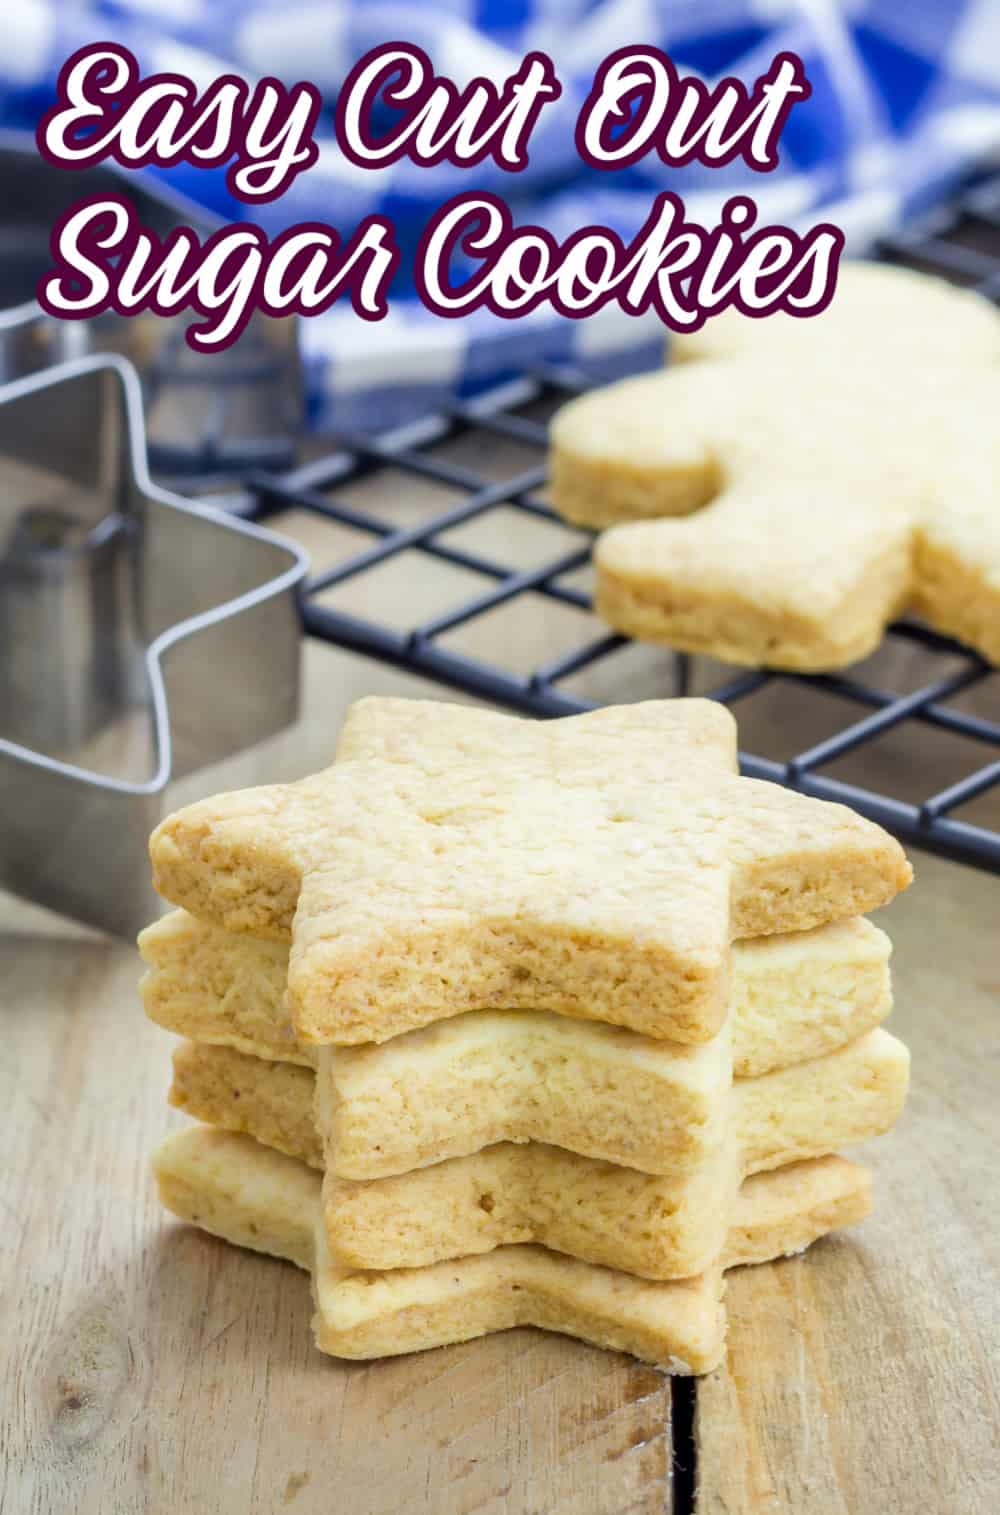 This recipe for Easy Cut Out Sugar Cookies is simple, delicious, and the only recipe you'll need any time of the year. It's the perfect basic recipe for beginners. via @jugglingactmama